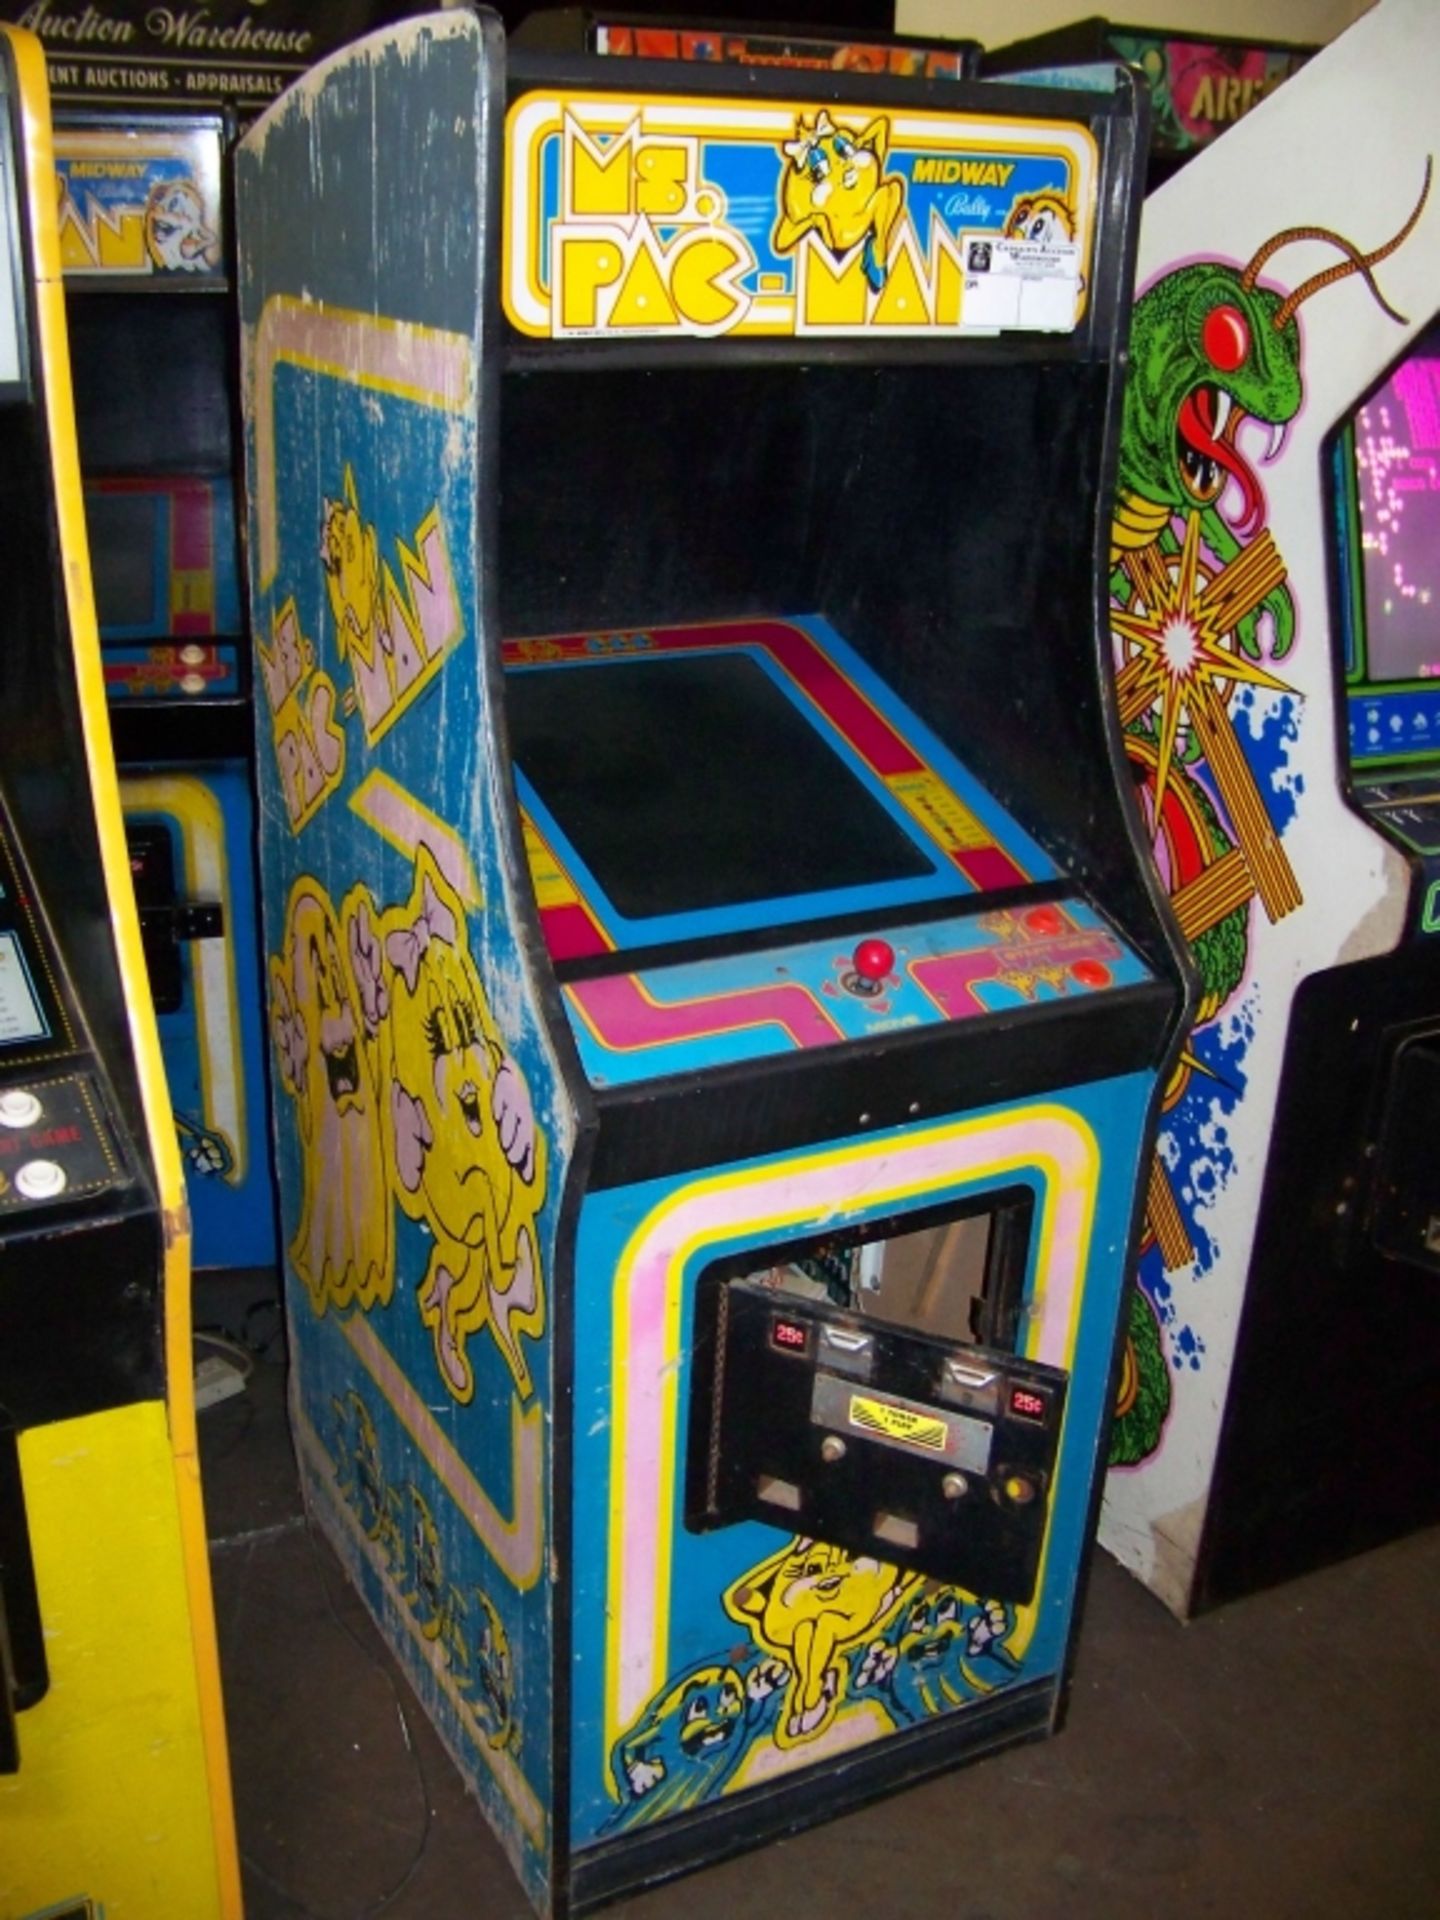 MS PACMAN CLASSIC ARCADE GAME MIDWAY Item is in used condition. Evidence of wear and commercial - Image 4 of 4